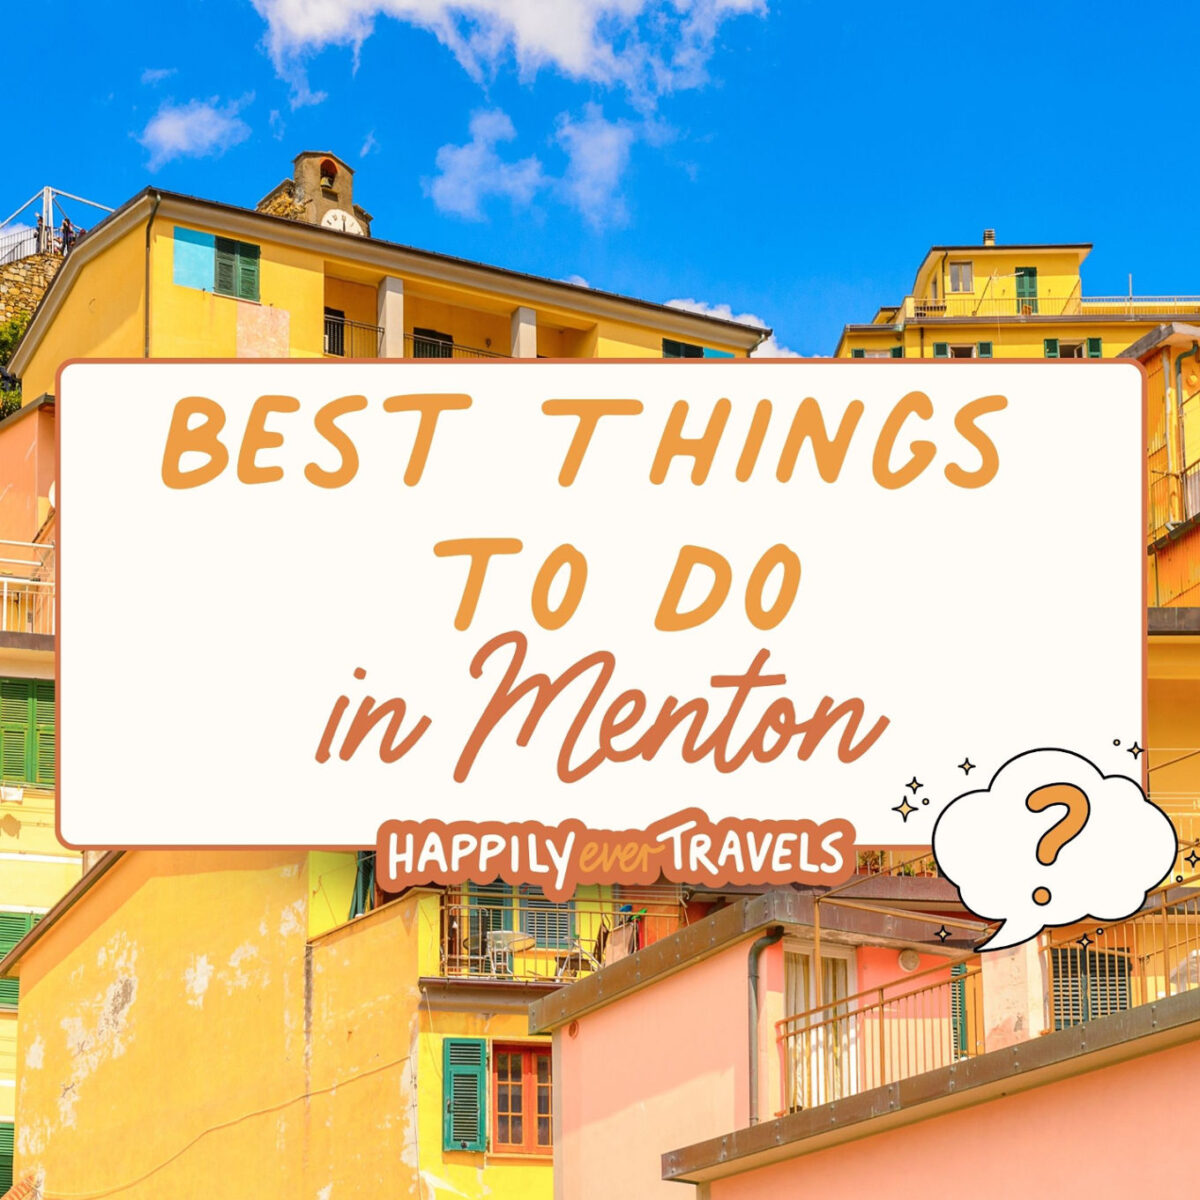 18 Best Things to Do in Menton